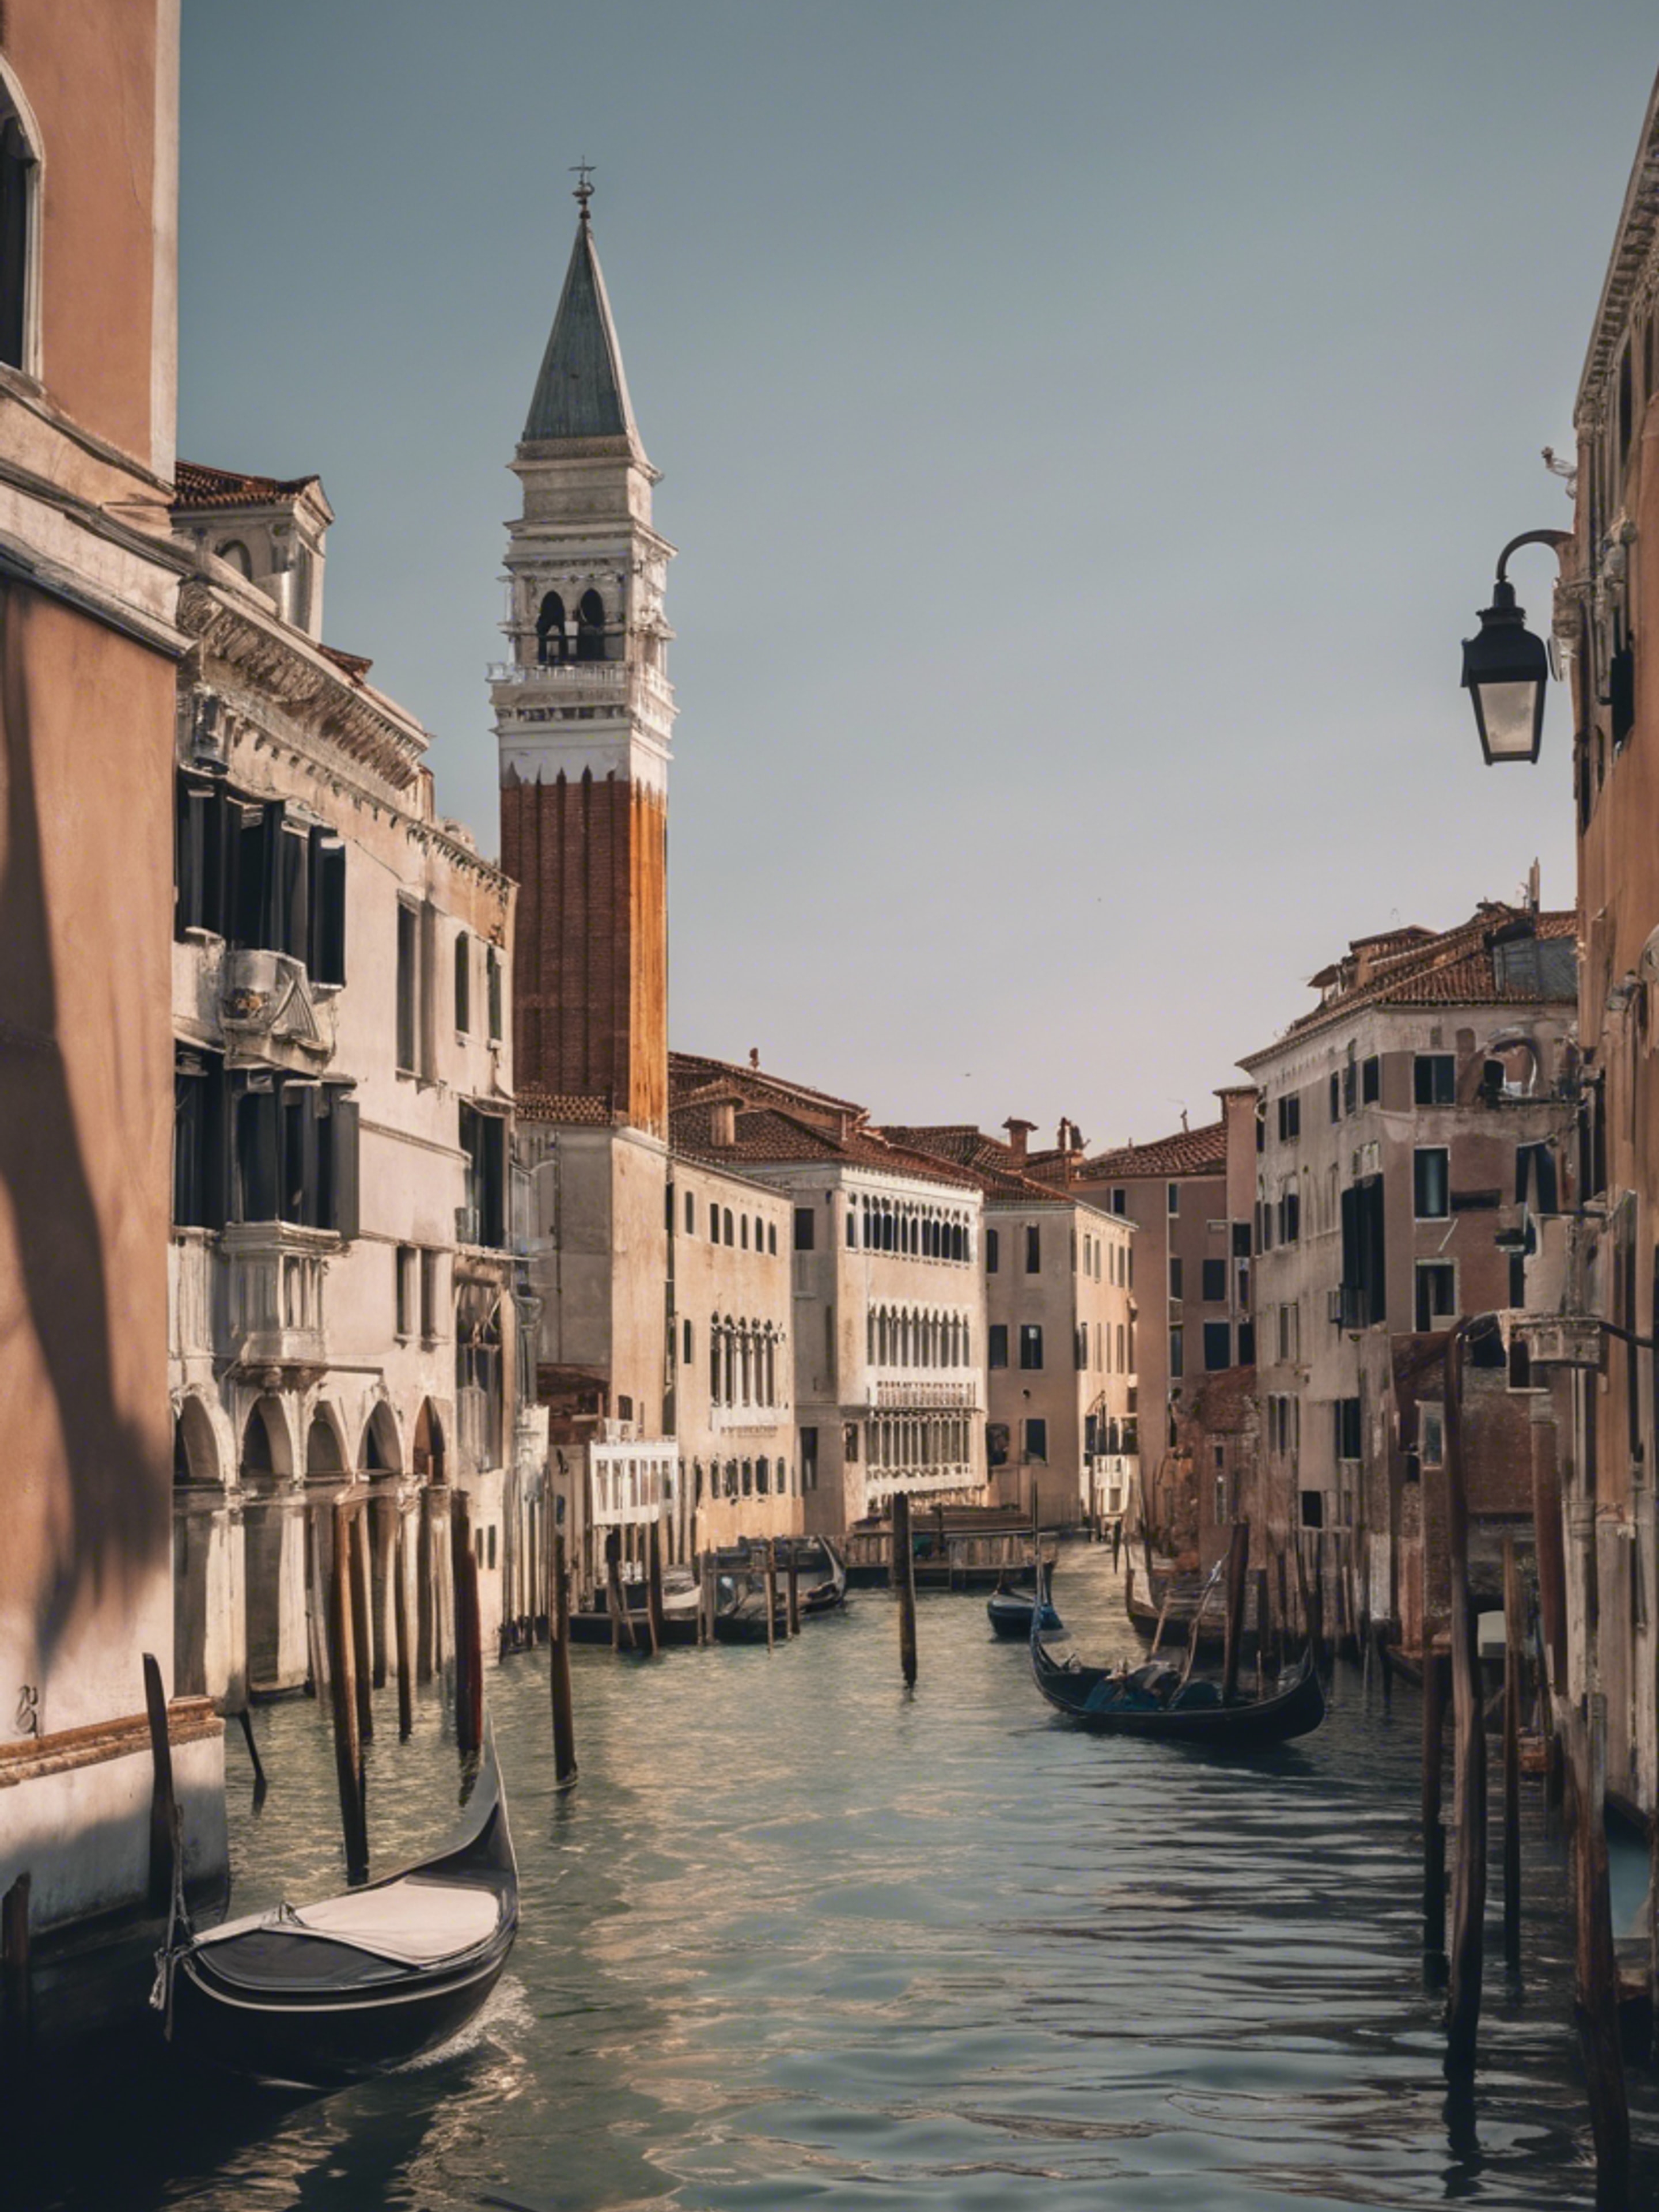 The enchanting skyline of Venice, showing the harmony of waterways and gothic architecture. ផ្ទាំង​រូបភាព[ea568ee278994e97af3a]